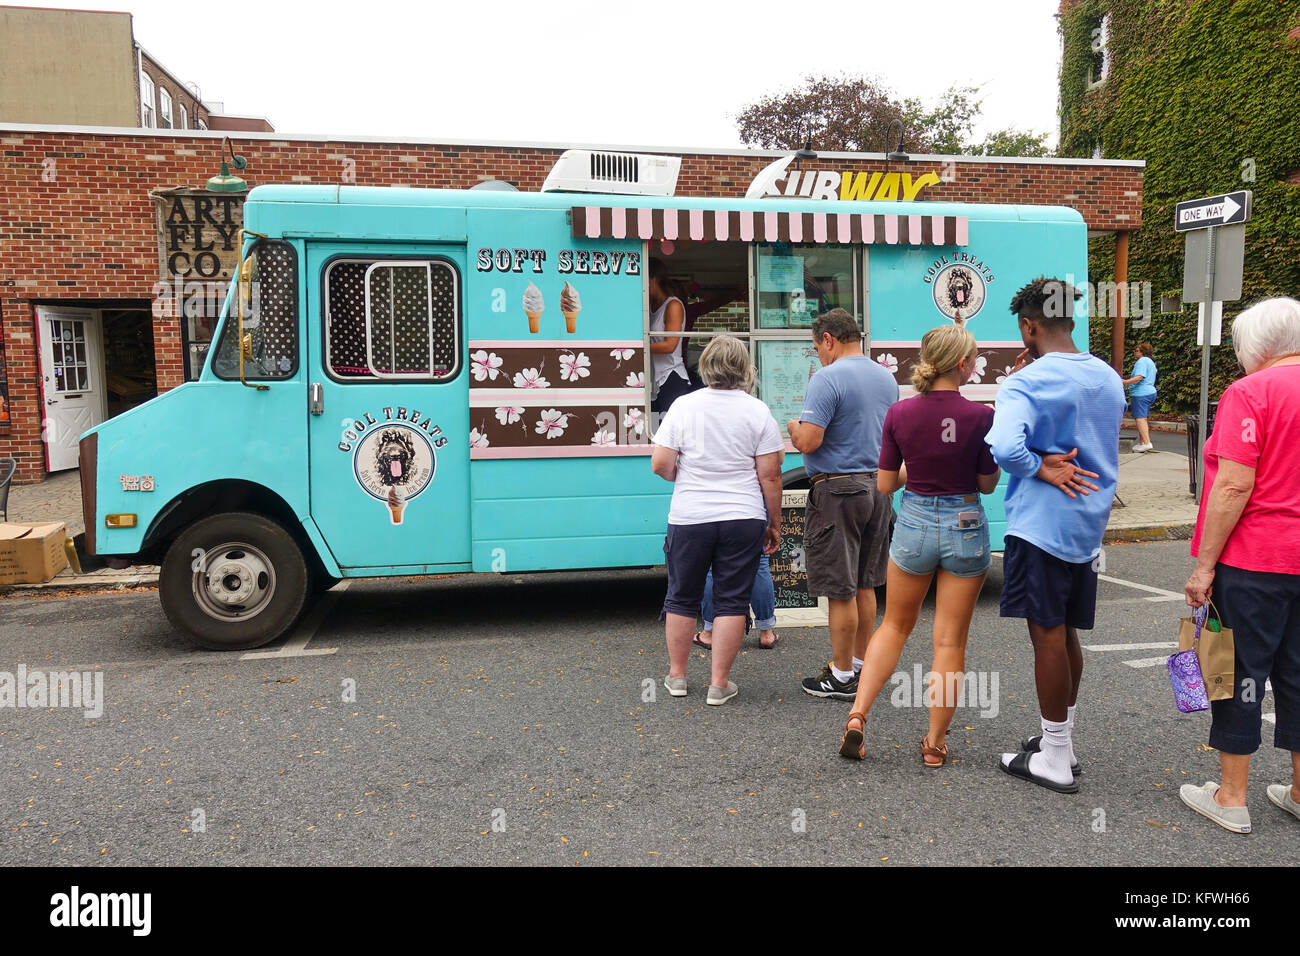 Soft serve Ice cream van, truck in the streets with line of people to order, Easton, Pennsylvania, United states. Stock Photo